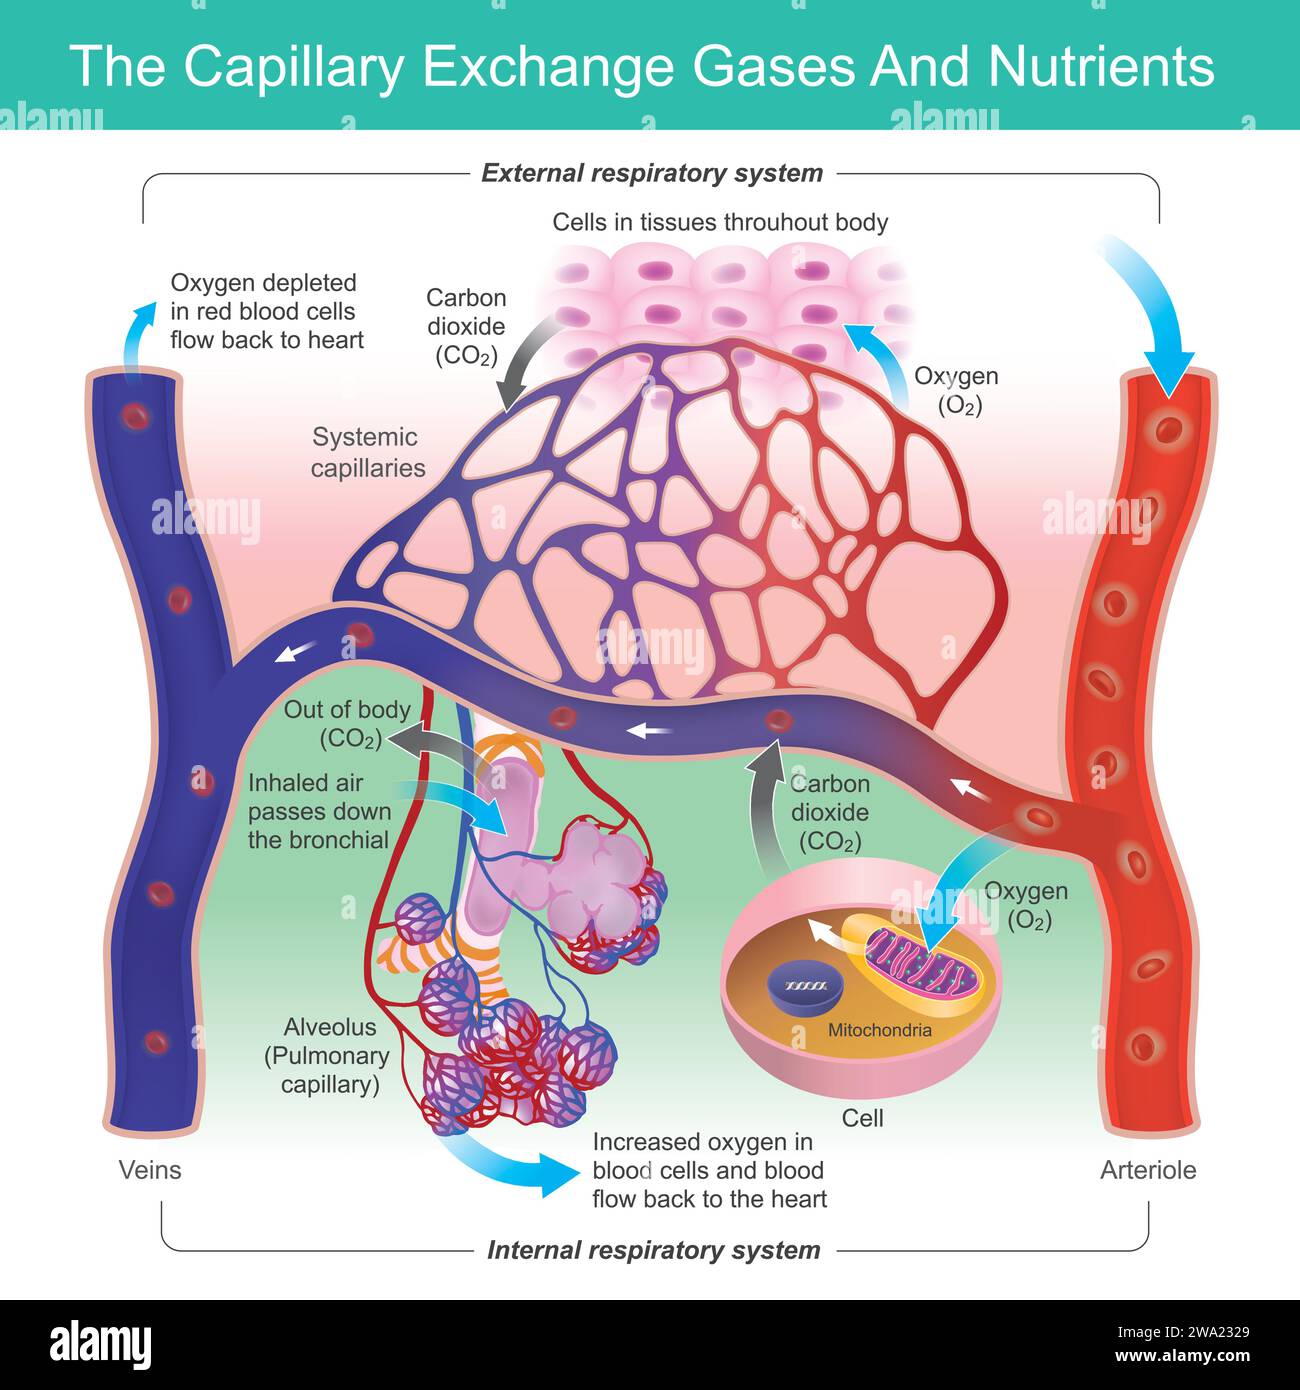 The Capillary Exchange Gases And Nutrients. Capillary function in exchange oxygen to carbon dioxide gases in red blood cells. Stock Vector